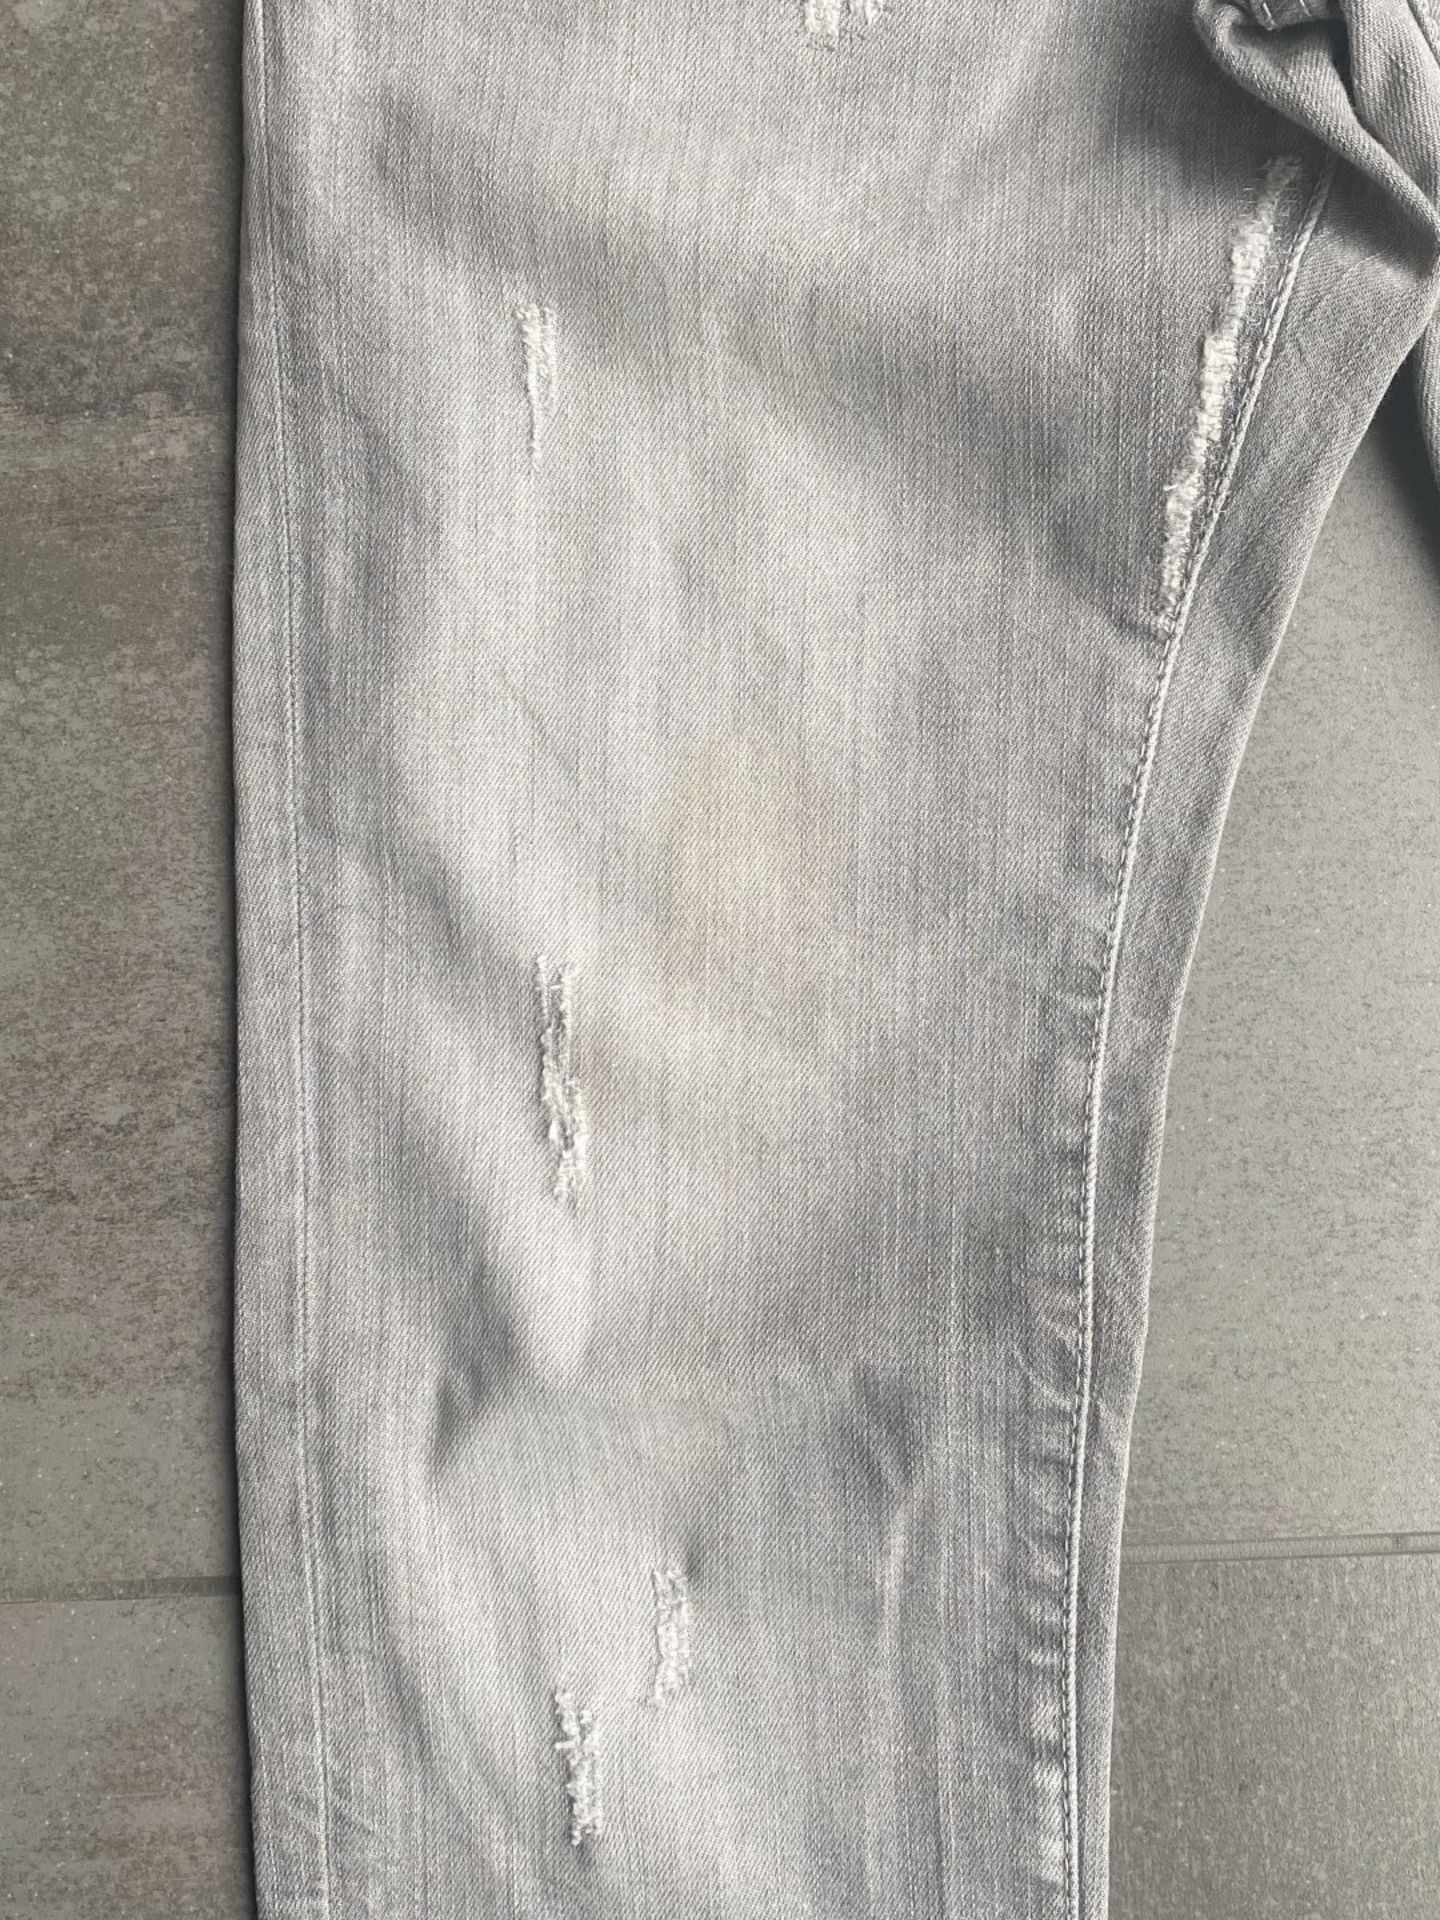 1 x Pair Of Men's Genuine Dsquared2 Designer Jeans In Grey - Waist Size: UK 32 / Italy 48 - Image 3 of 8